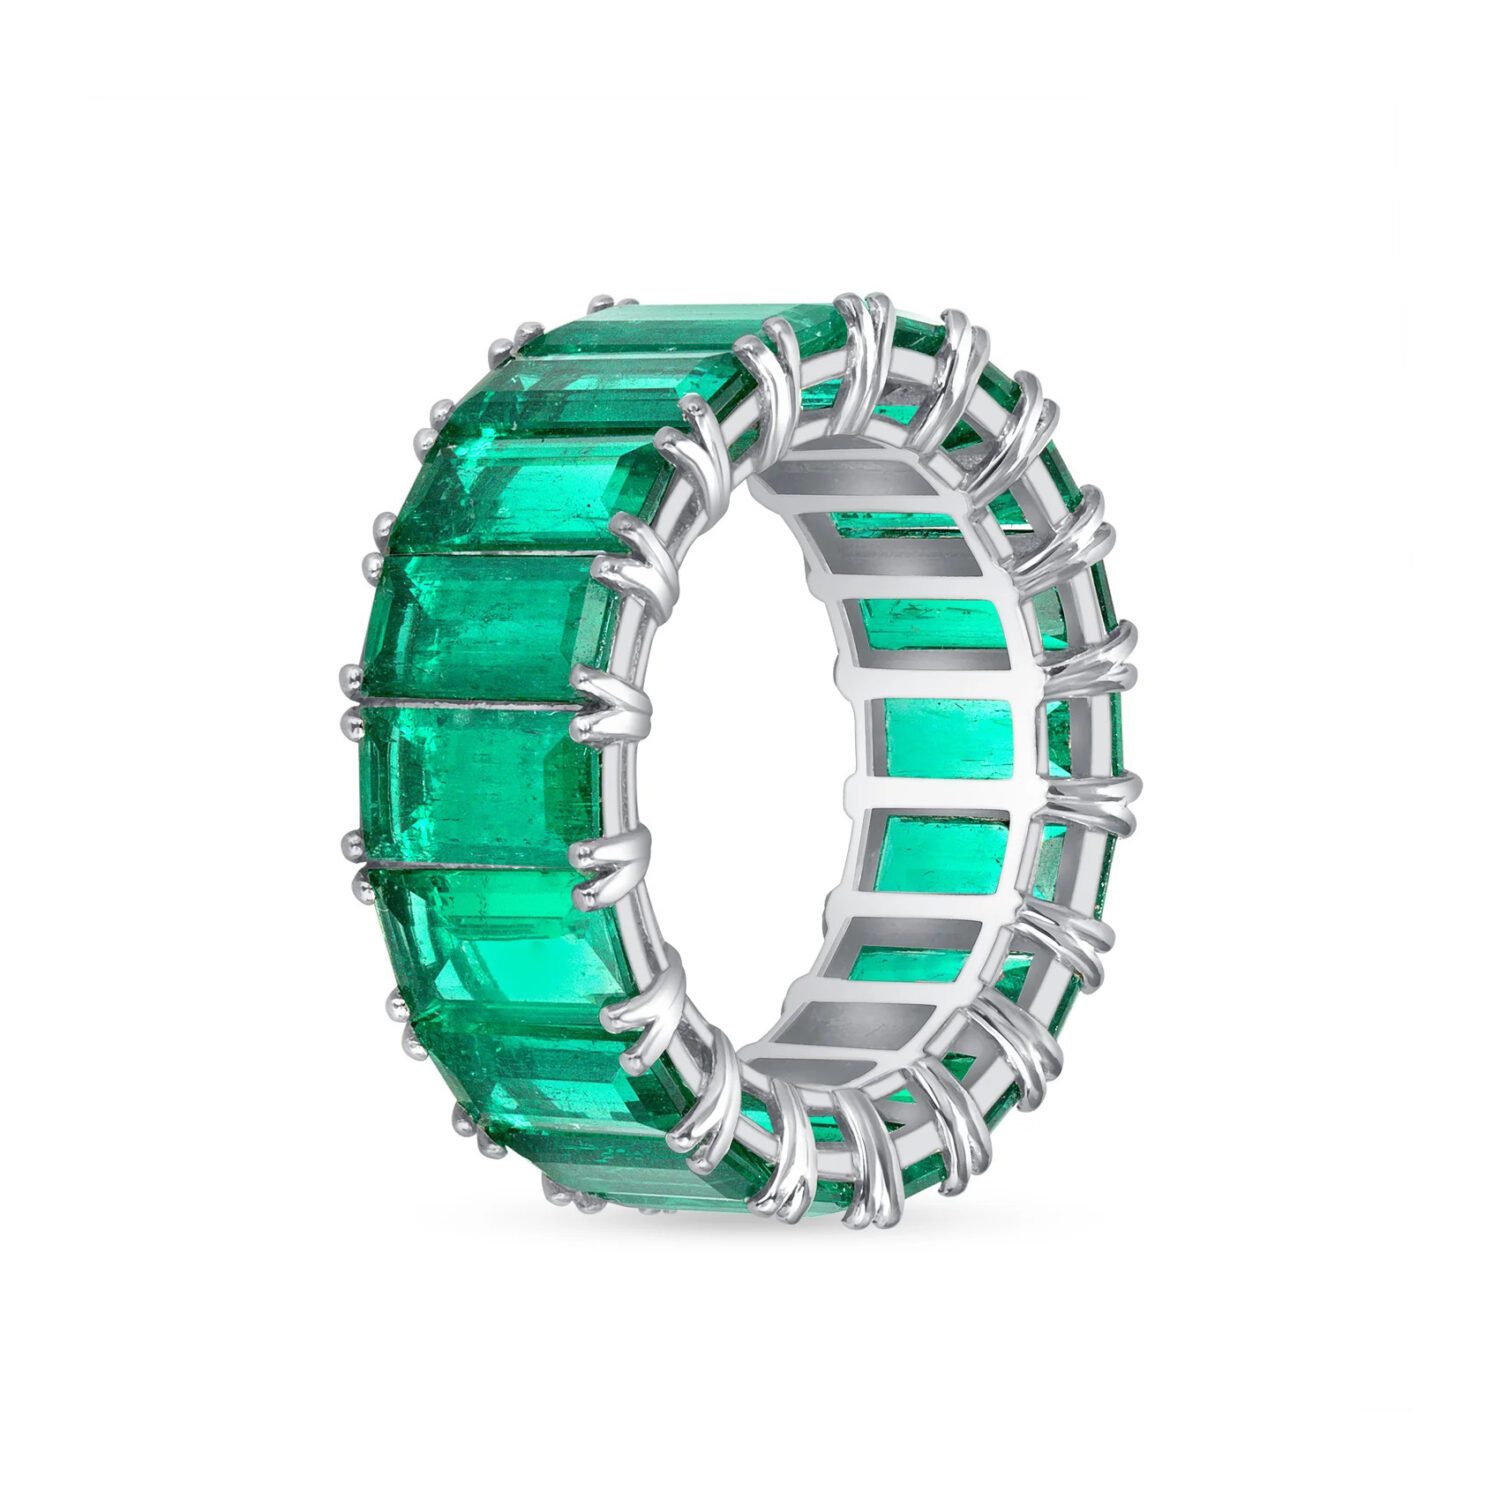 Lab grown diamonds in Cyprus - The Gems Crown Emerald Cut 5.4ct Full Eternity Band best quality and price